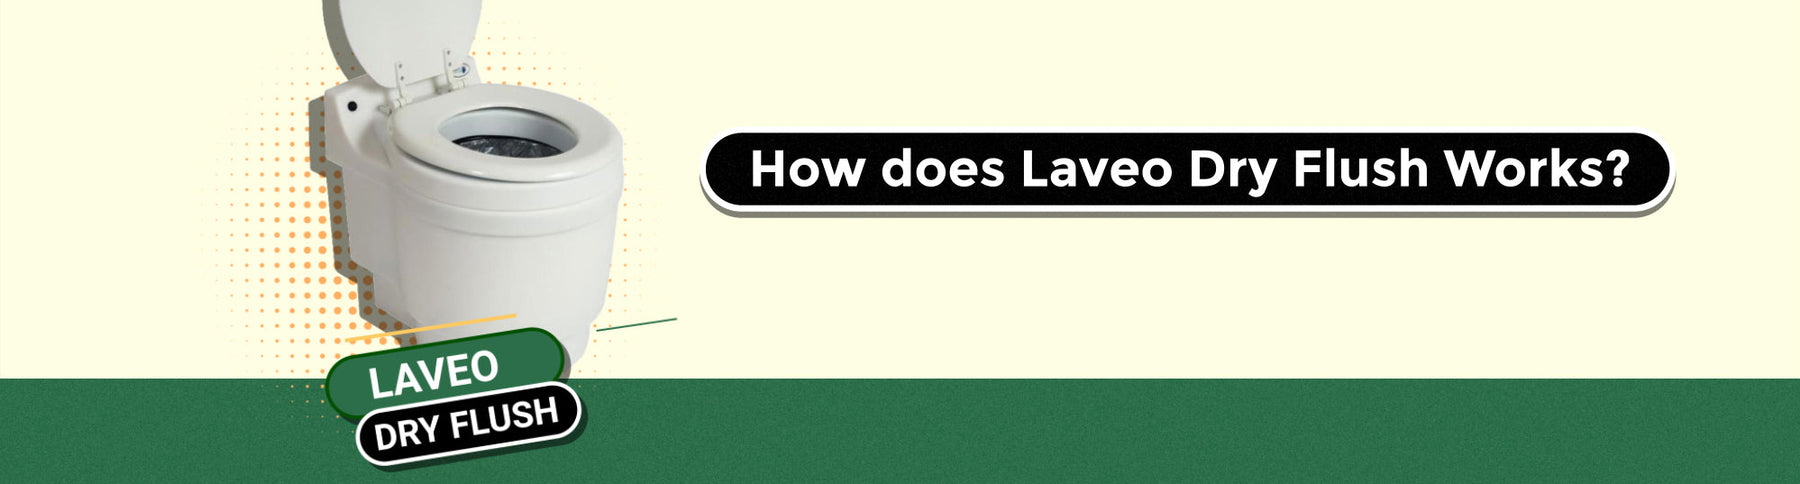 How does Laveo Dry Flush works?